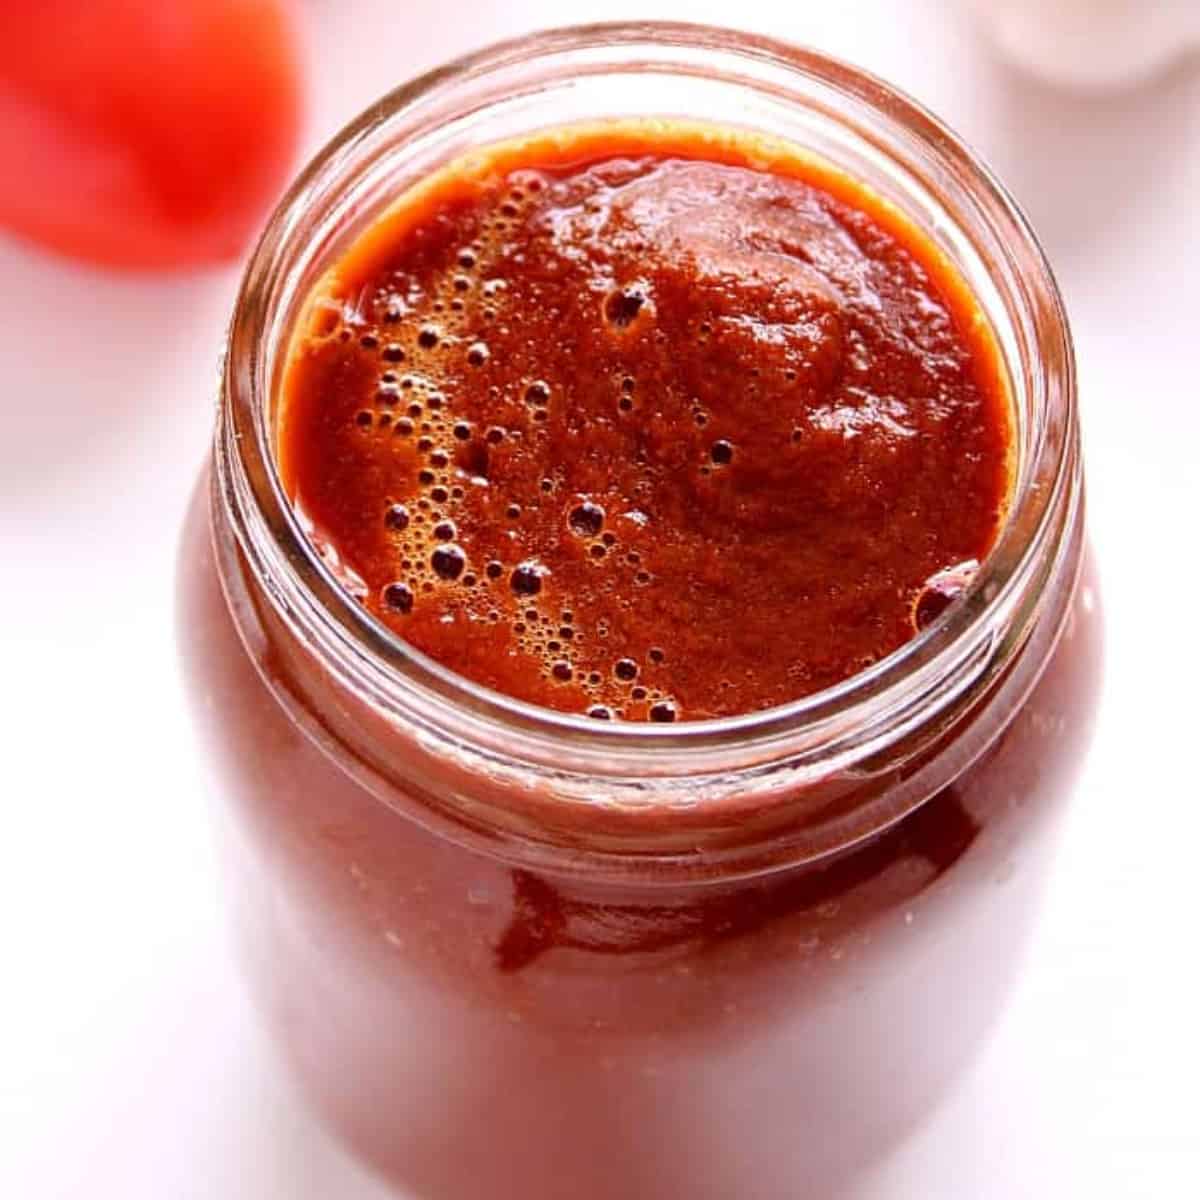 Square image of enchilada sauce in a glass jar.